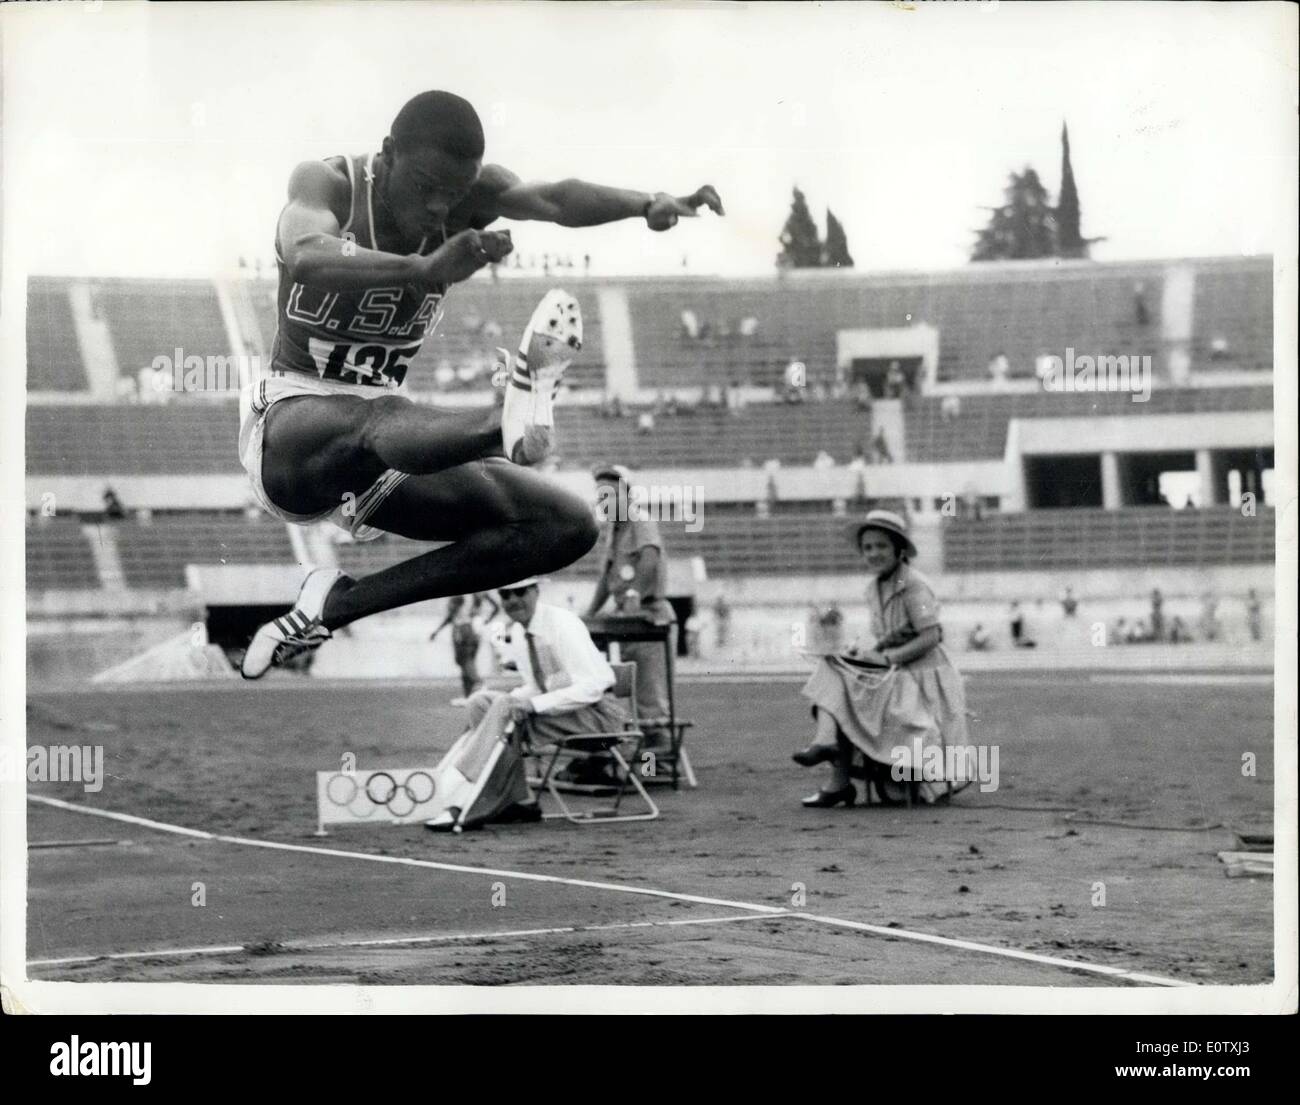 Sep. 03, 1960 - Olympic games in Rome. American wins long jump final. Photo shows R. Boston, of the United States seen winning the final of the Men's Long Jump event in Rome yesterday when he created a new Olympic record with a jump of 26ft. 7 1/2 ins, and gave America another Gold Medal. Stock Photo